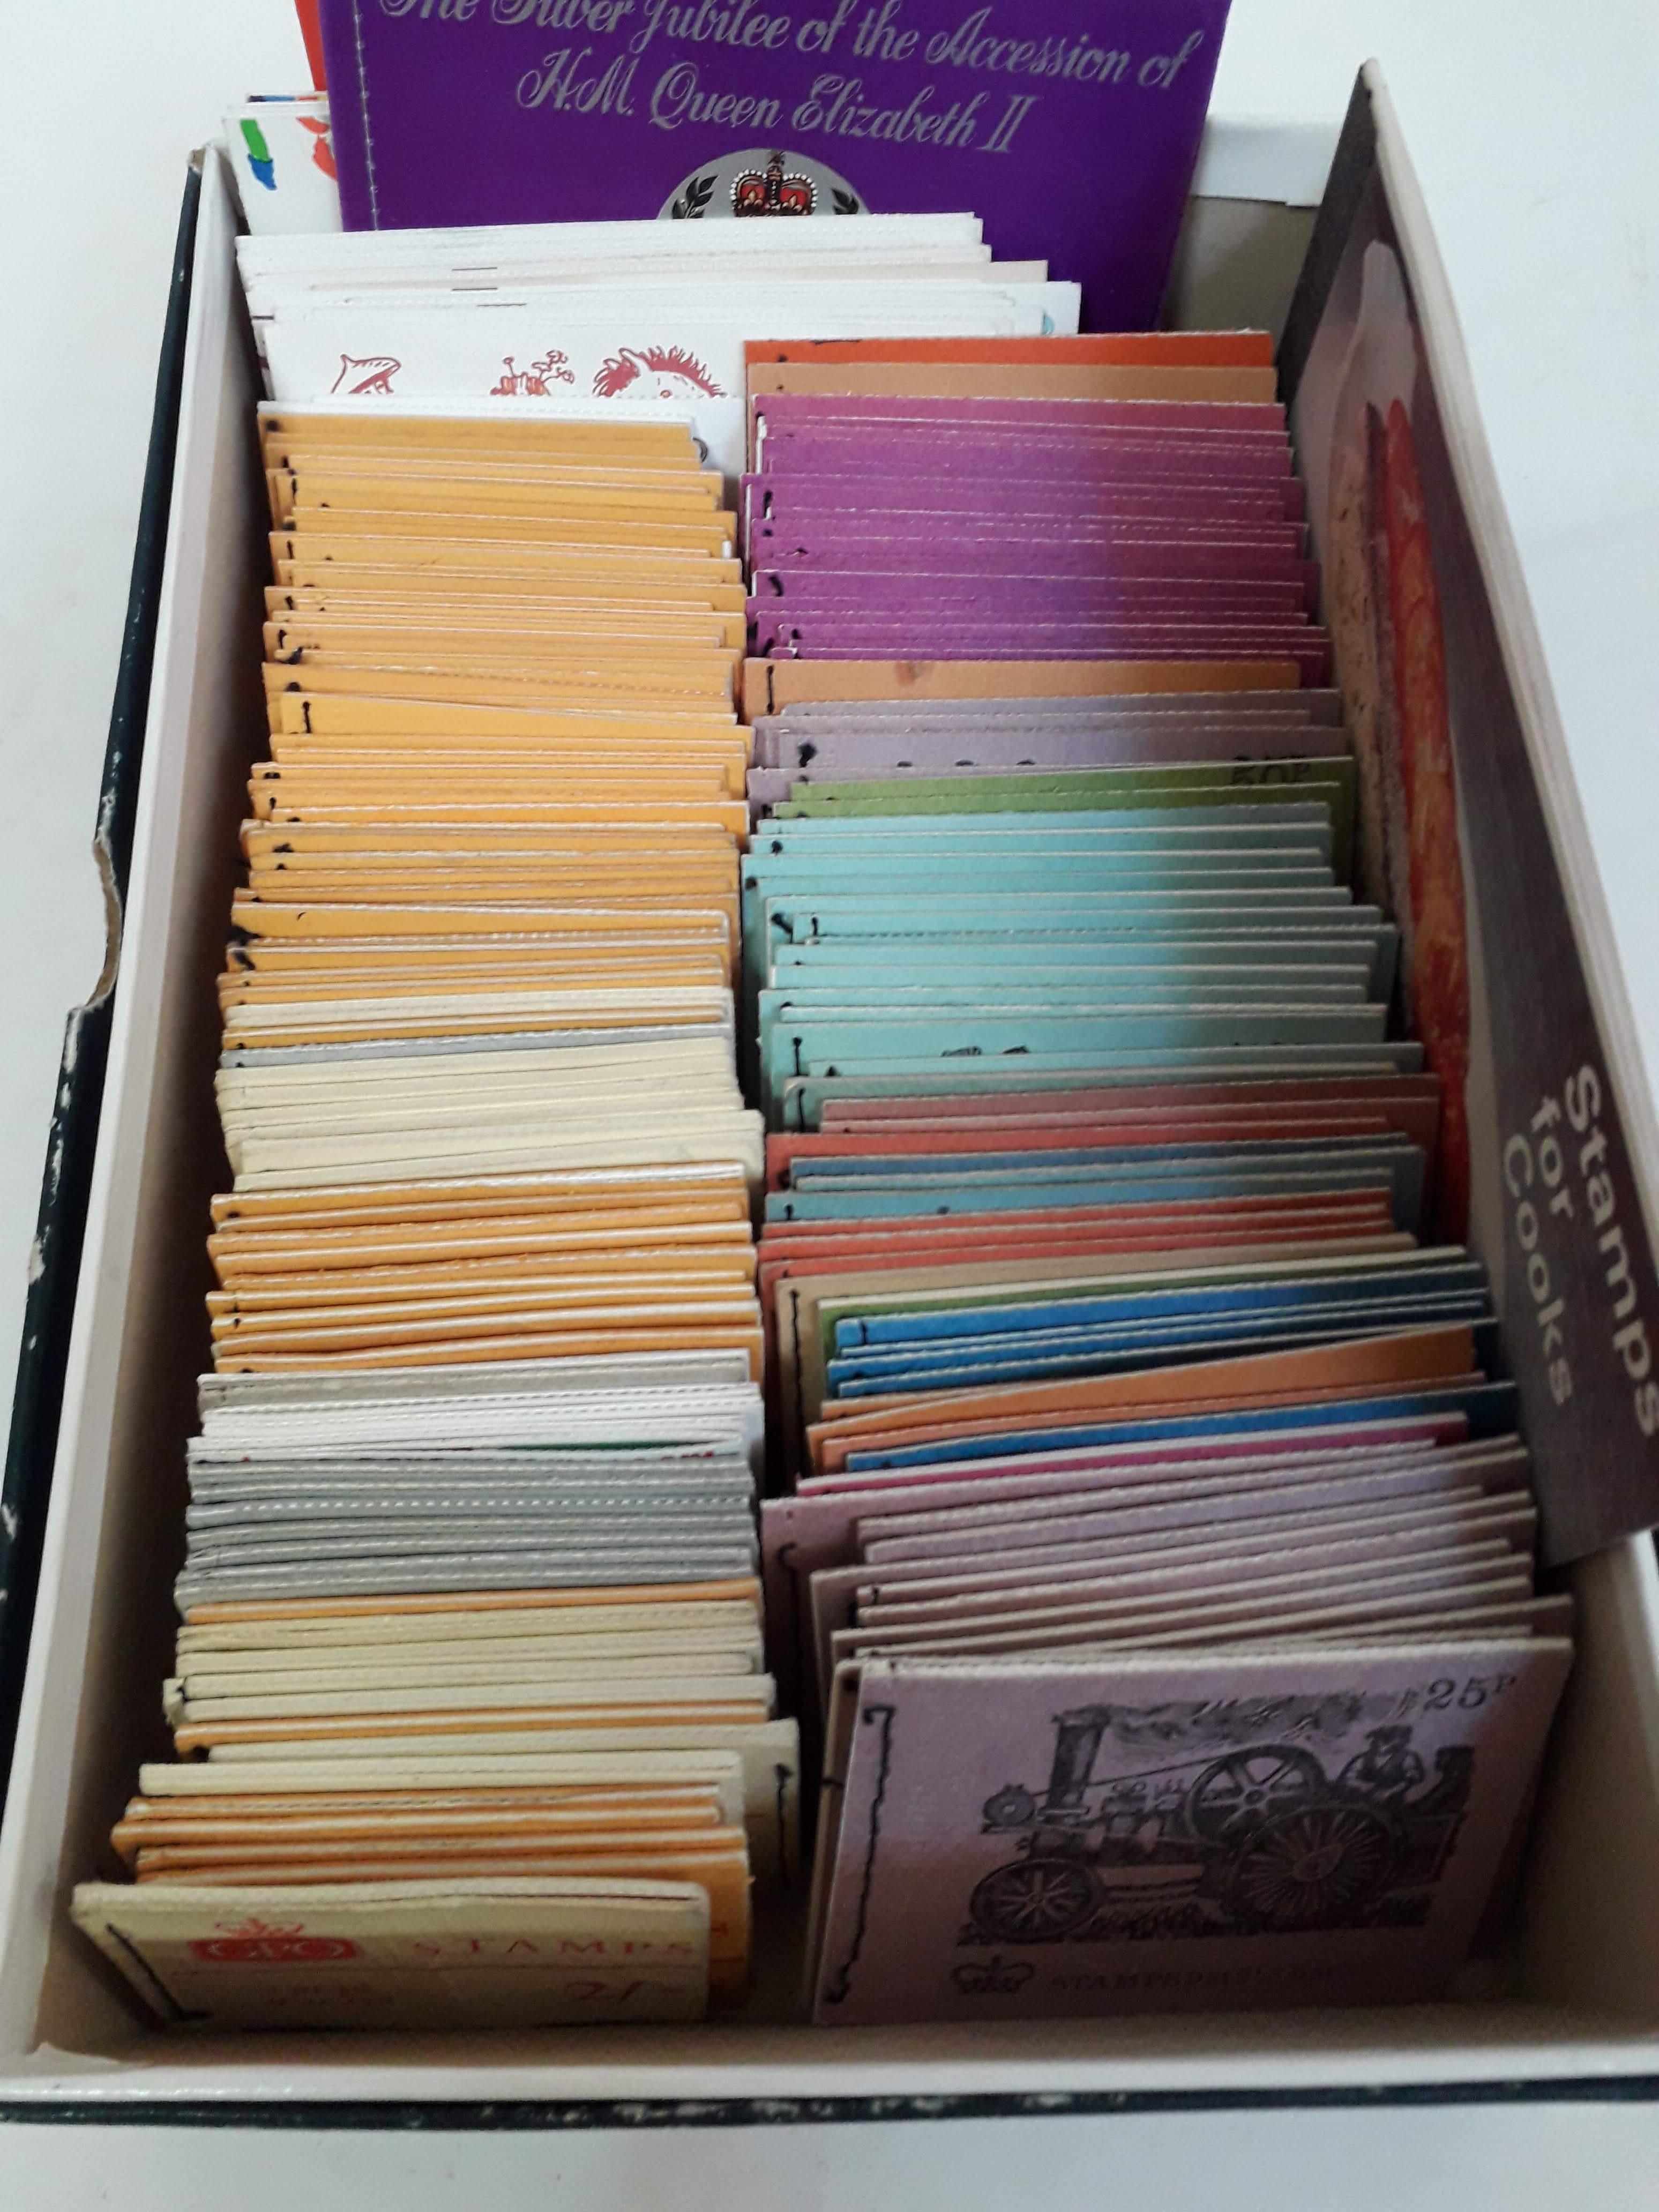 GB mint stamp booklet collection, mainly 1950s/1960s, some later, approx. 450. - Image 14 of 16